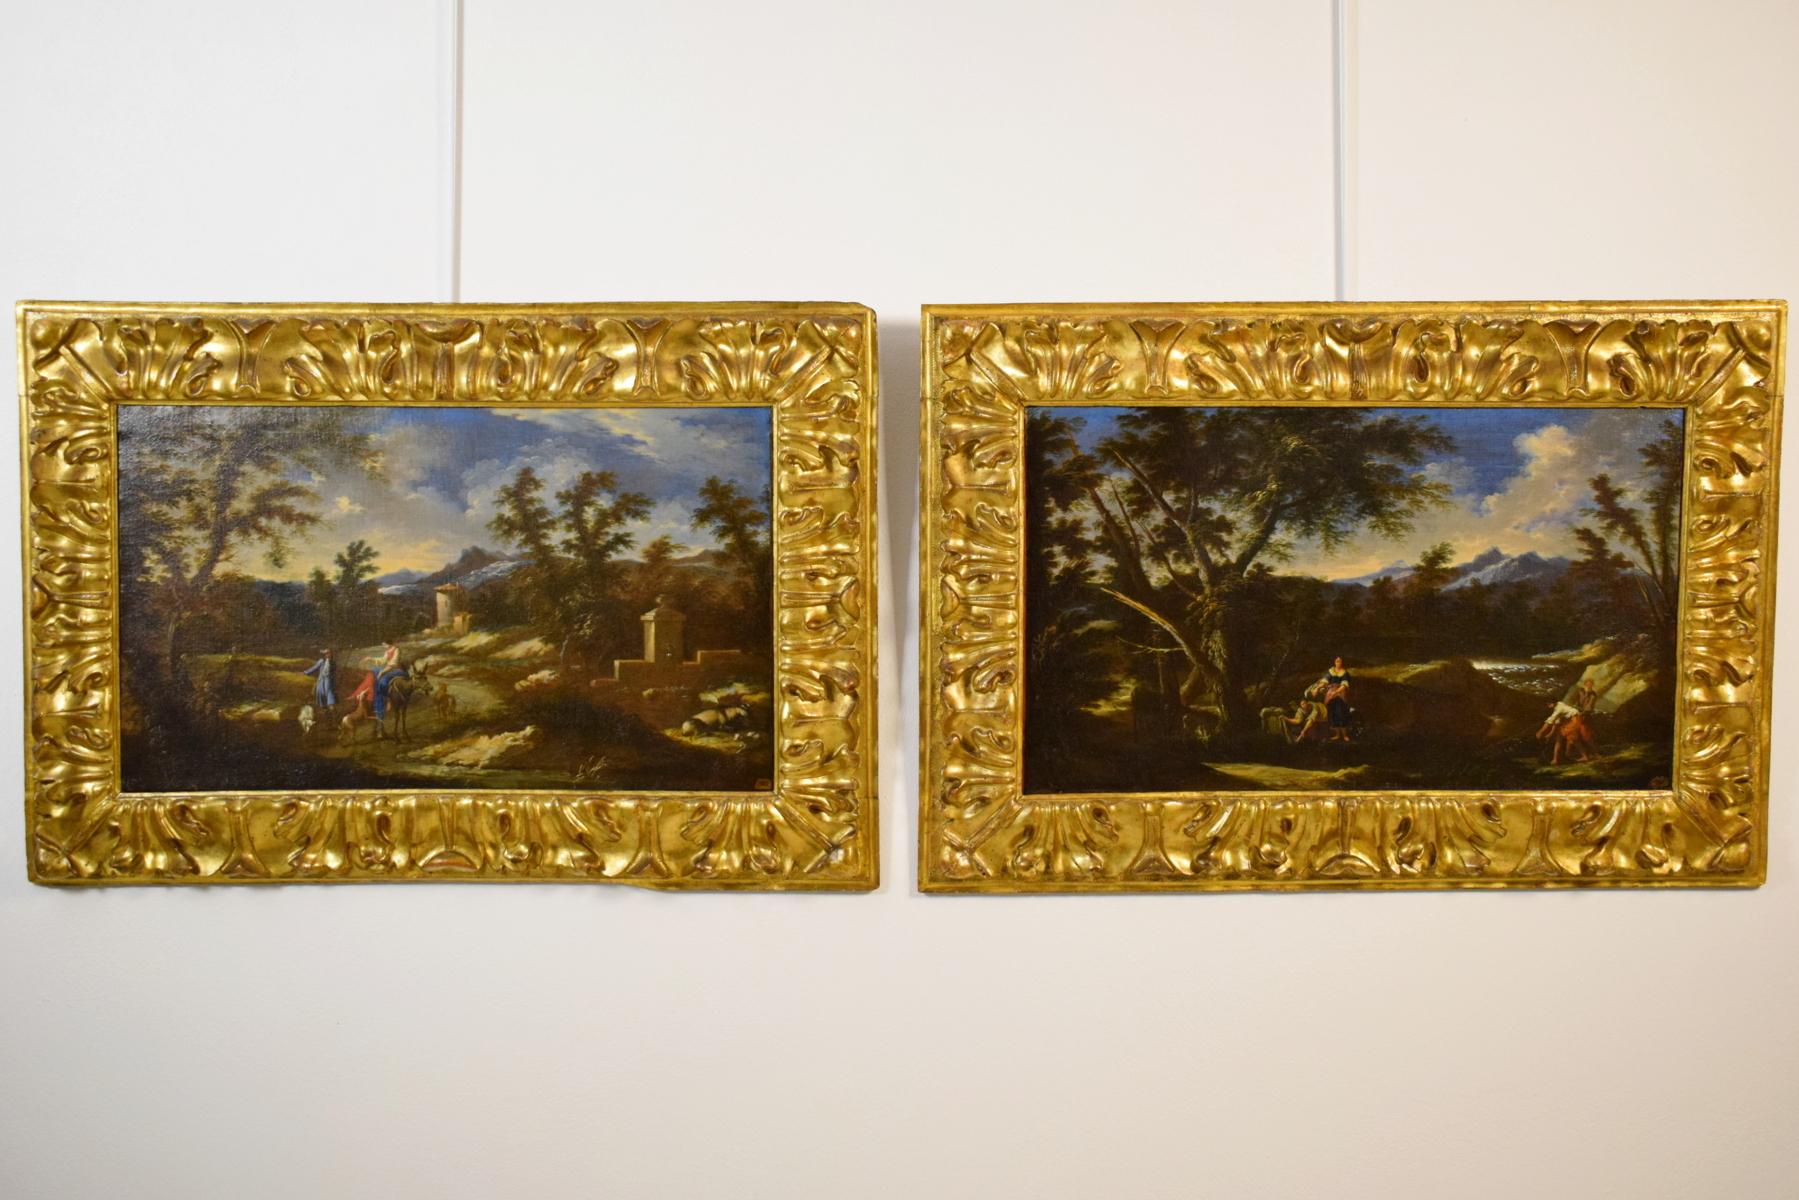 Early 18th century, pair of Italian painted, scenes of country life, attributed to Antonio Francesco Peruzzini

The fine pair oil on canvas paintings depicts scenes of rural life.
Stylistically are attributable to the Italian painter Antonio